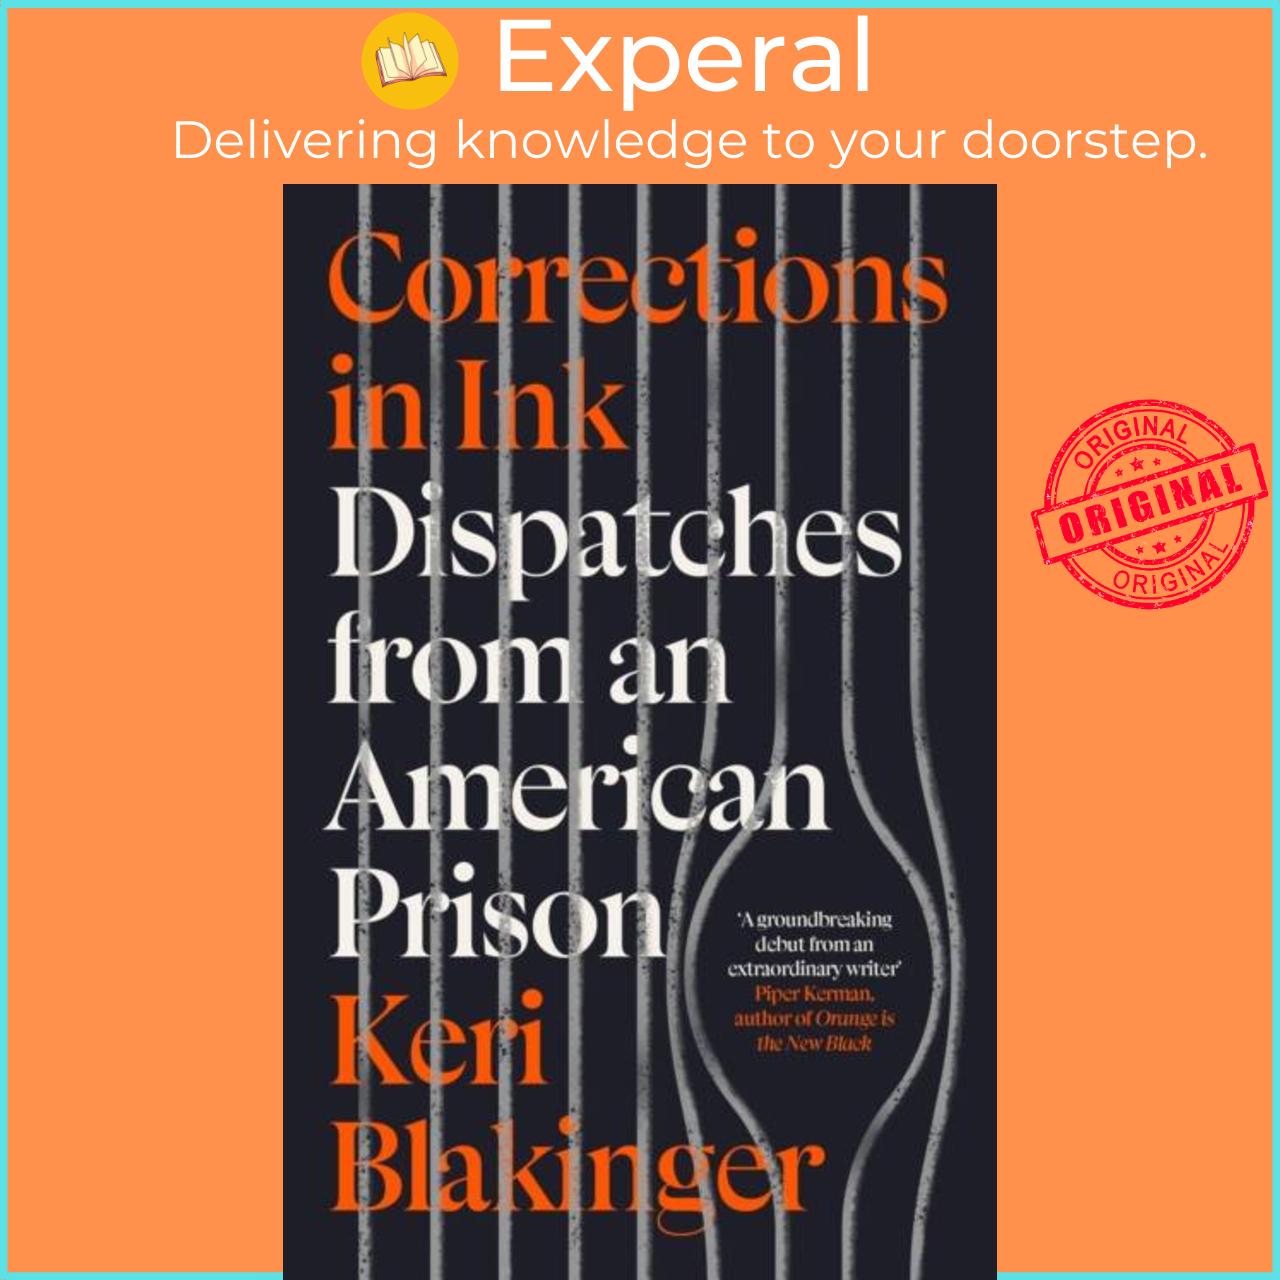 Sách - Corrections in Ink - Dispatches from an American Prison by Keri Blakinger (UK edition, paperback)